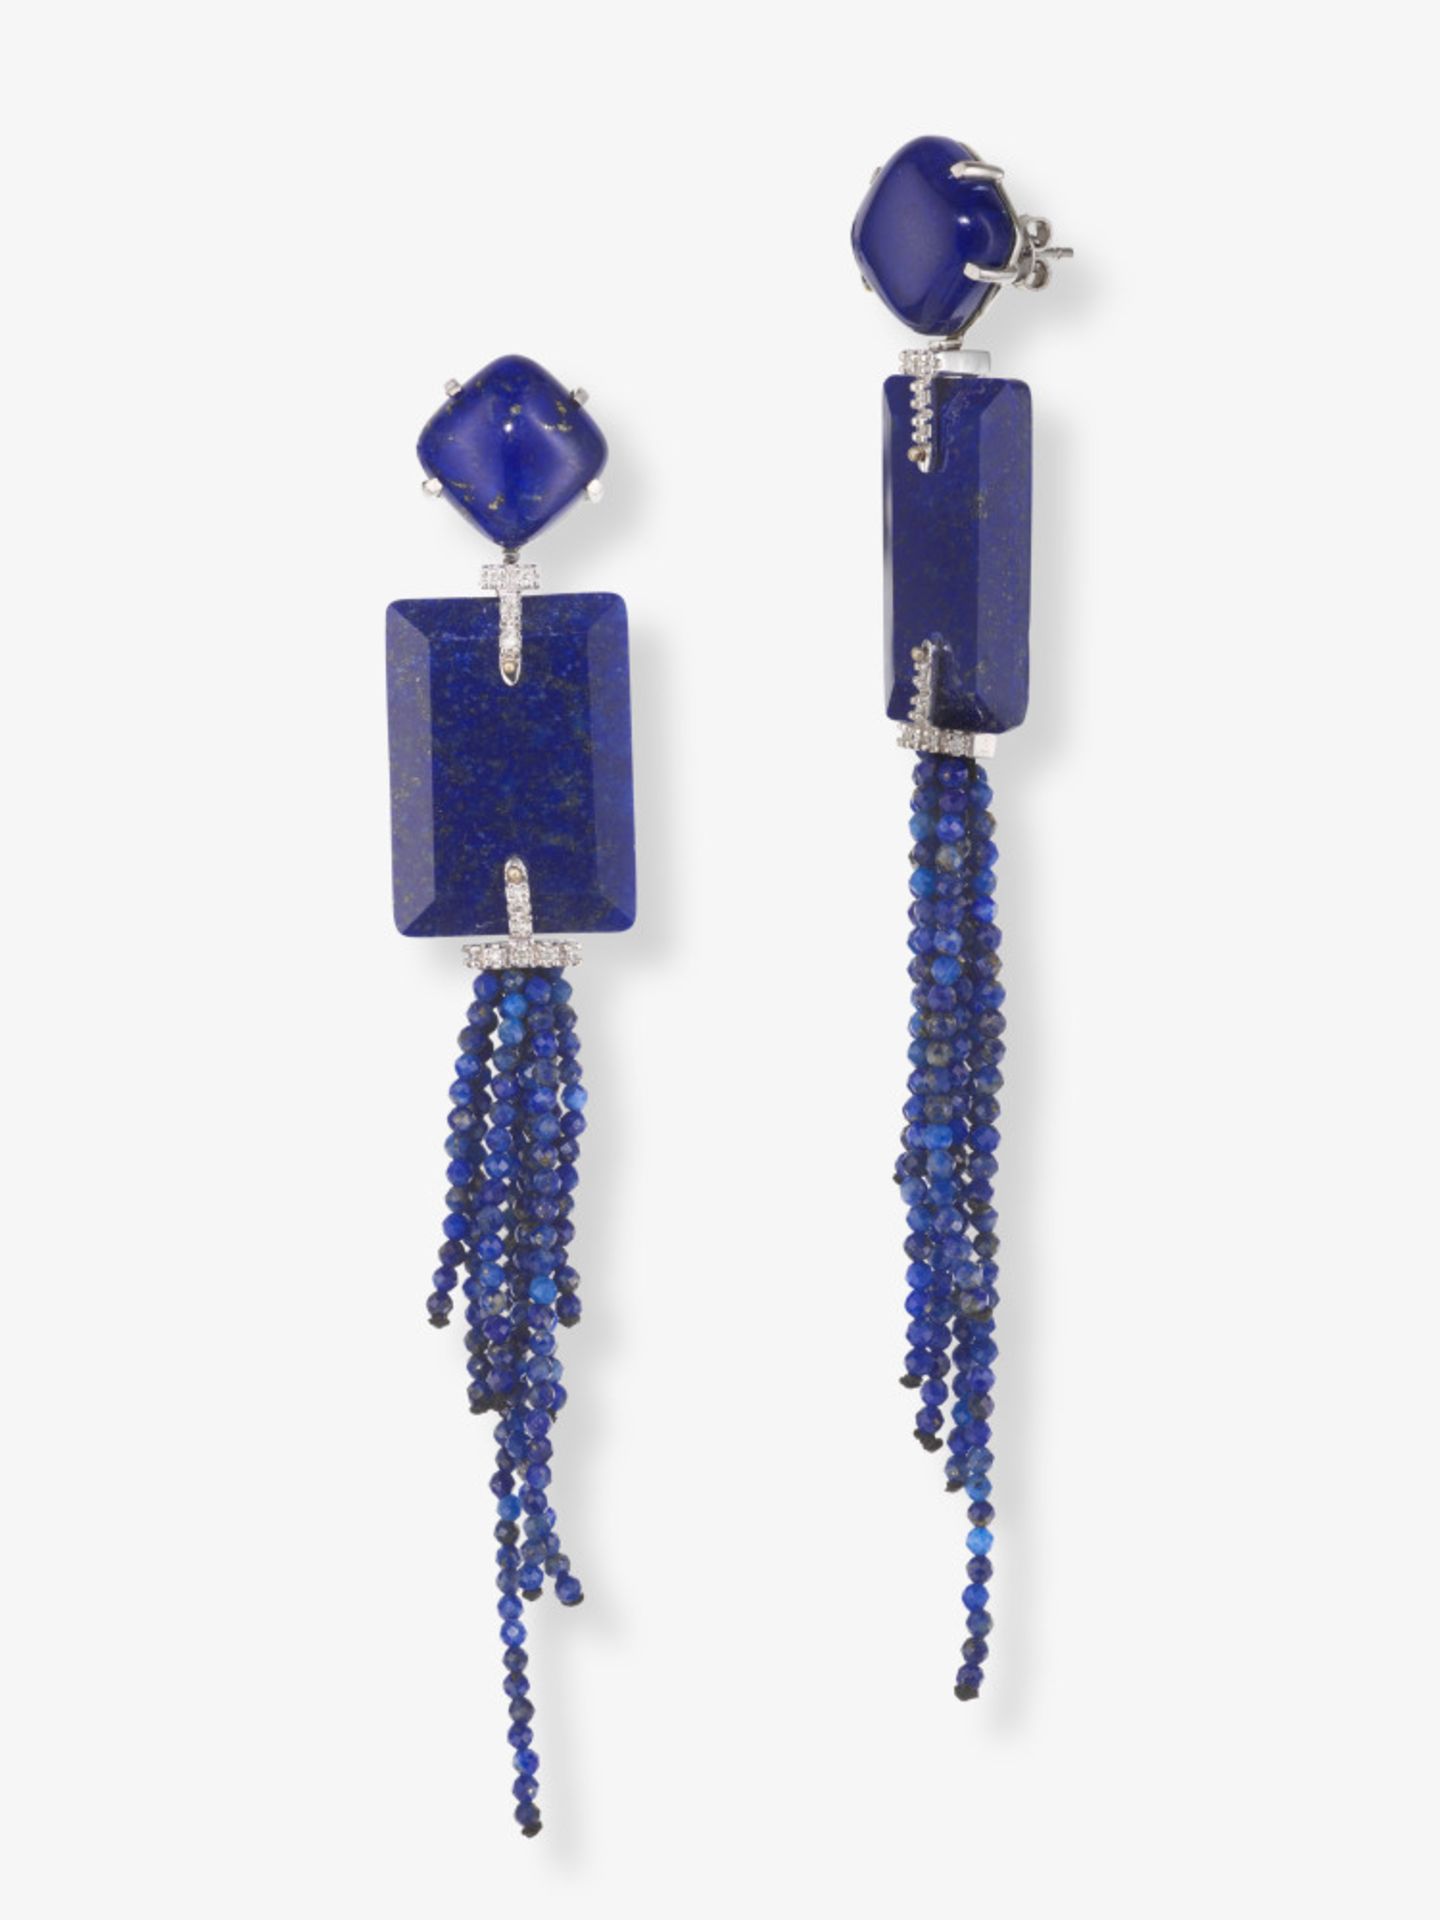 A pair of expressive stud earrings decorated with lapis lazuli and brilliant-cut diamonds - Image 3 of 4